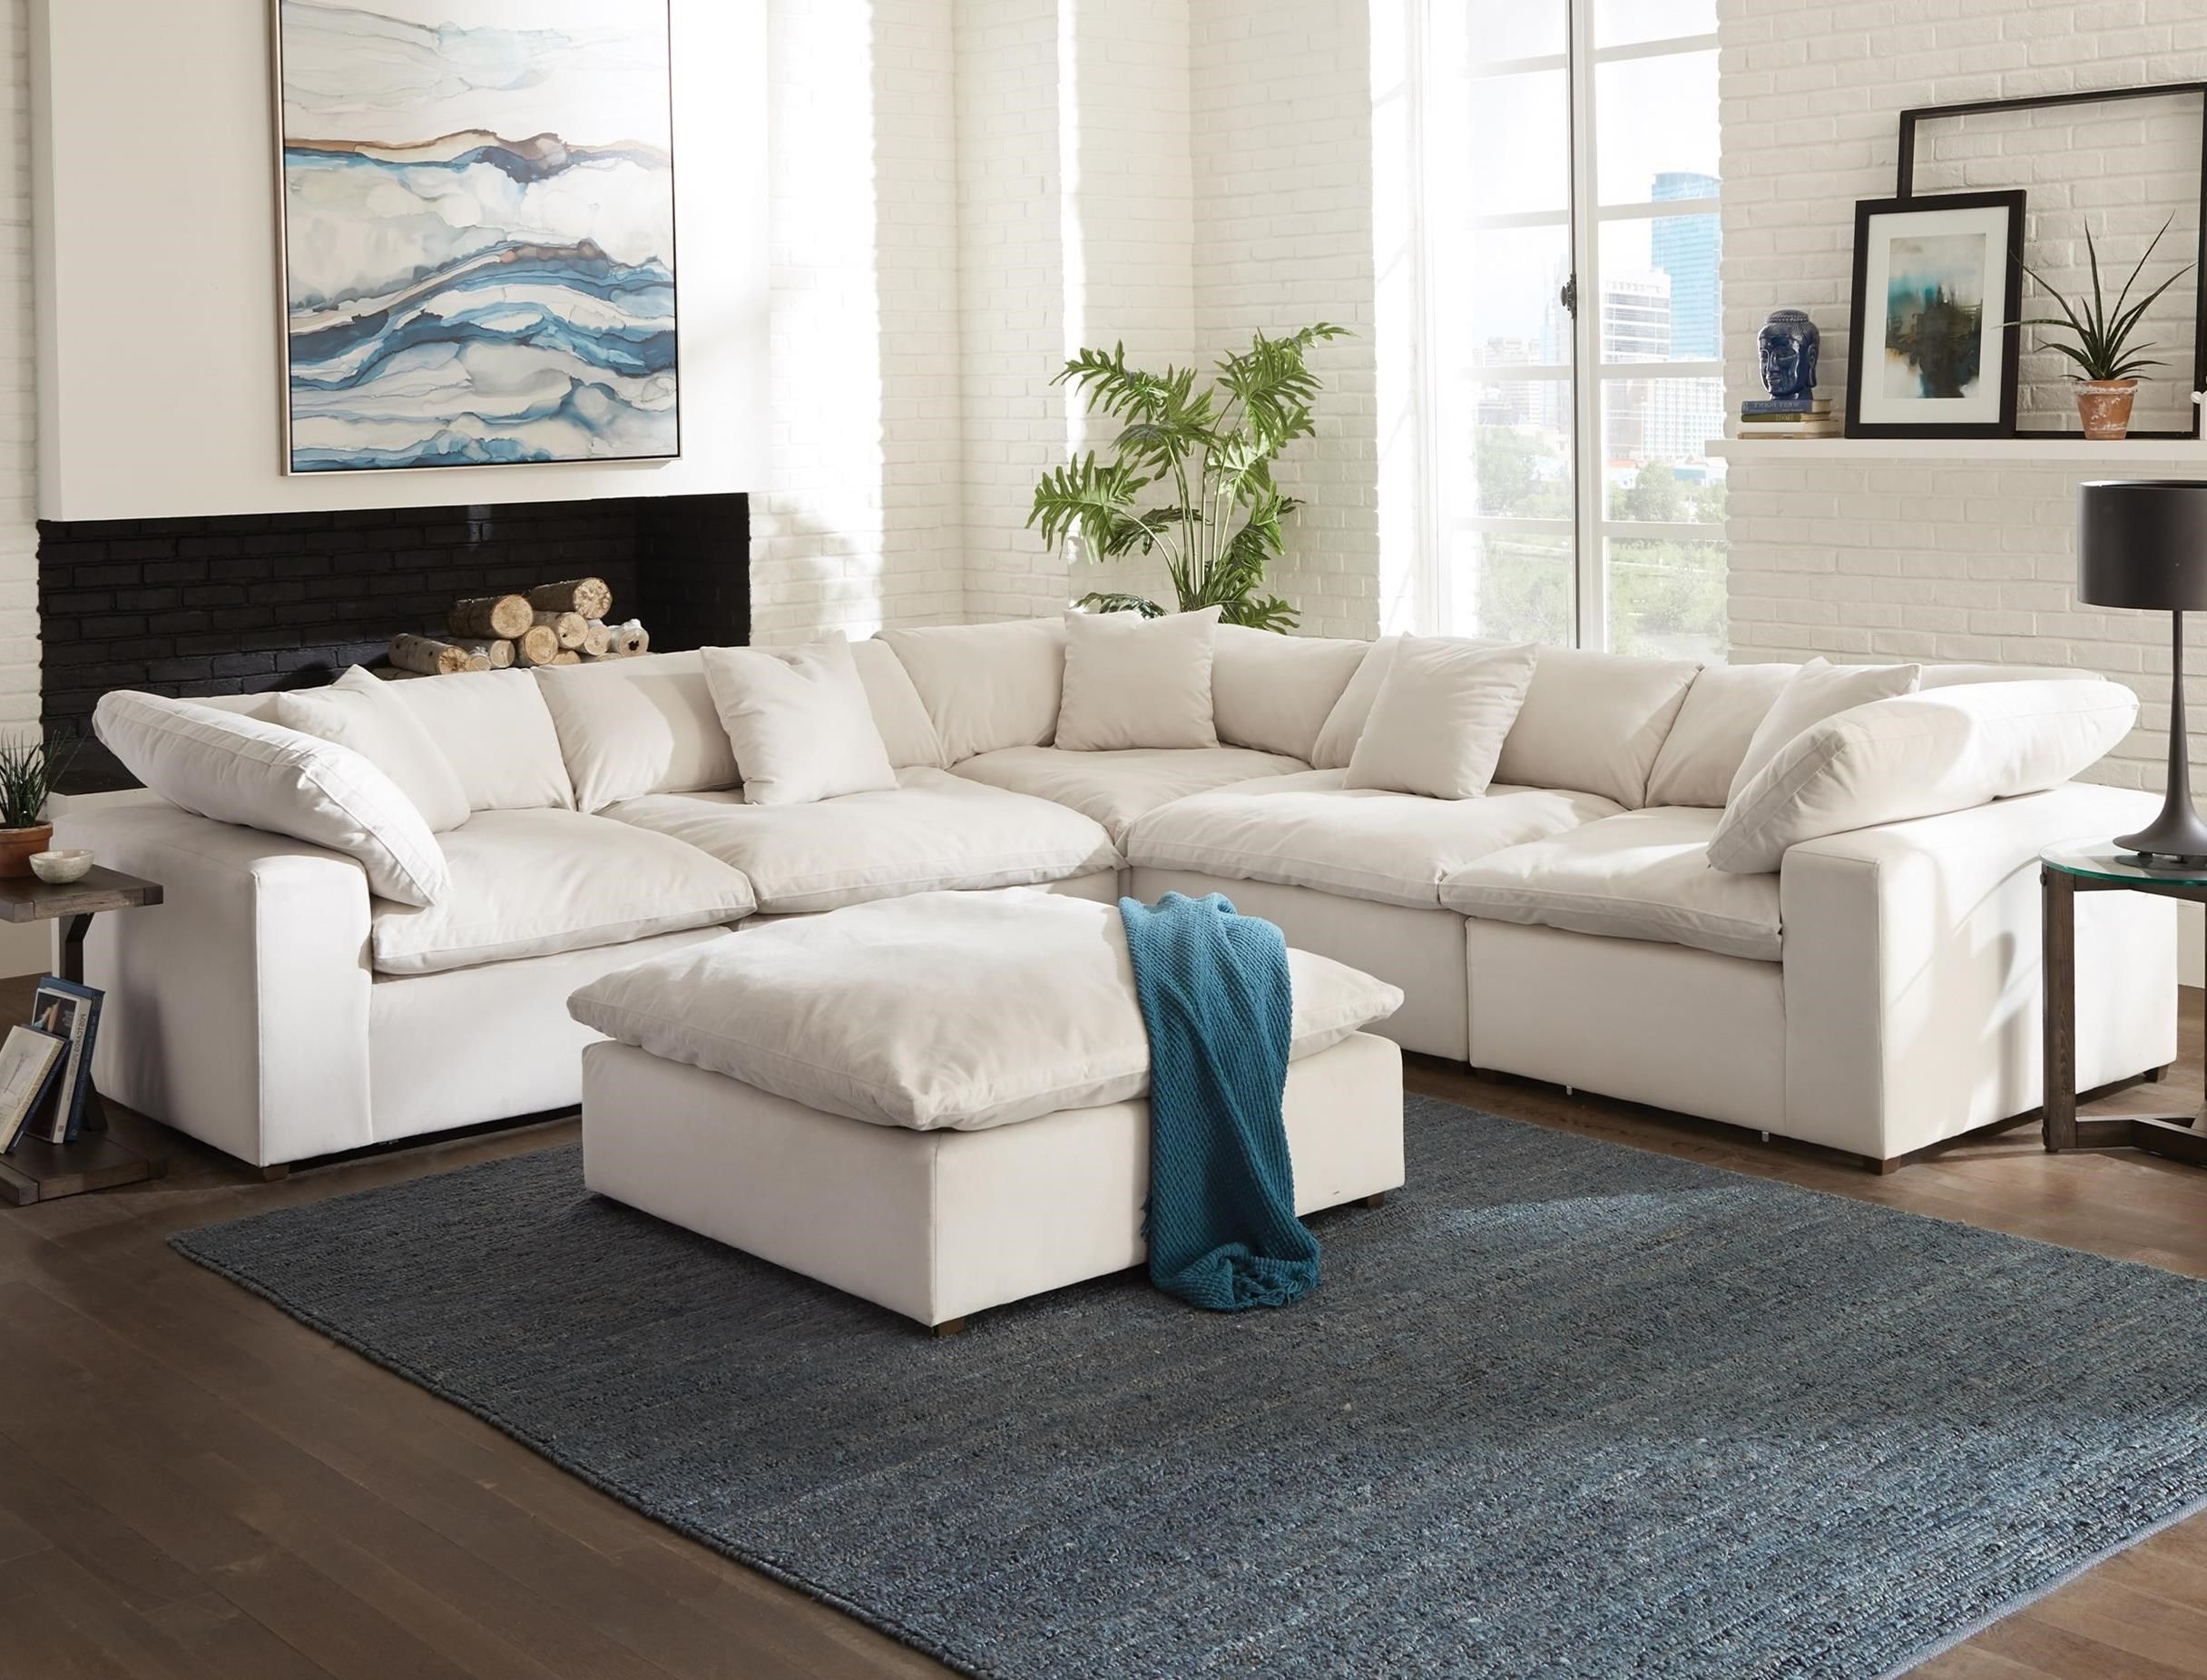 Jackson Furniture Posh Contemporary L Shaped Sectional Sofa | Standard Inside Modern L Shaped Sofa Sectionals (View 14 of 20)